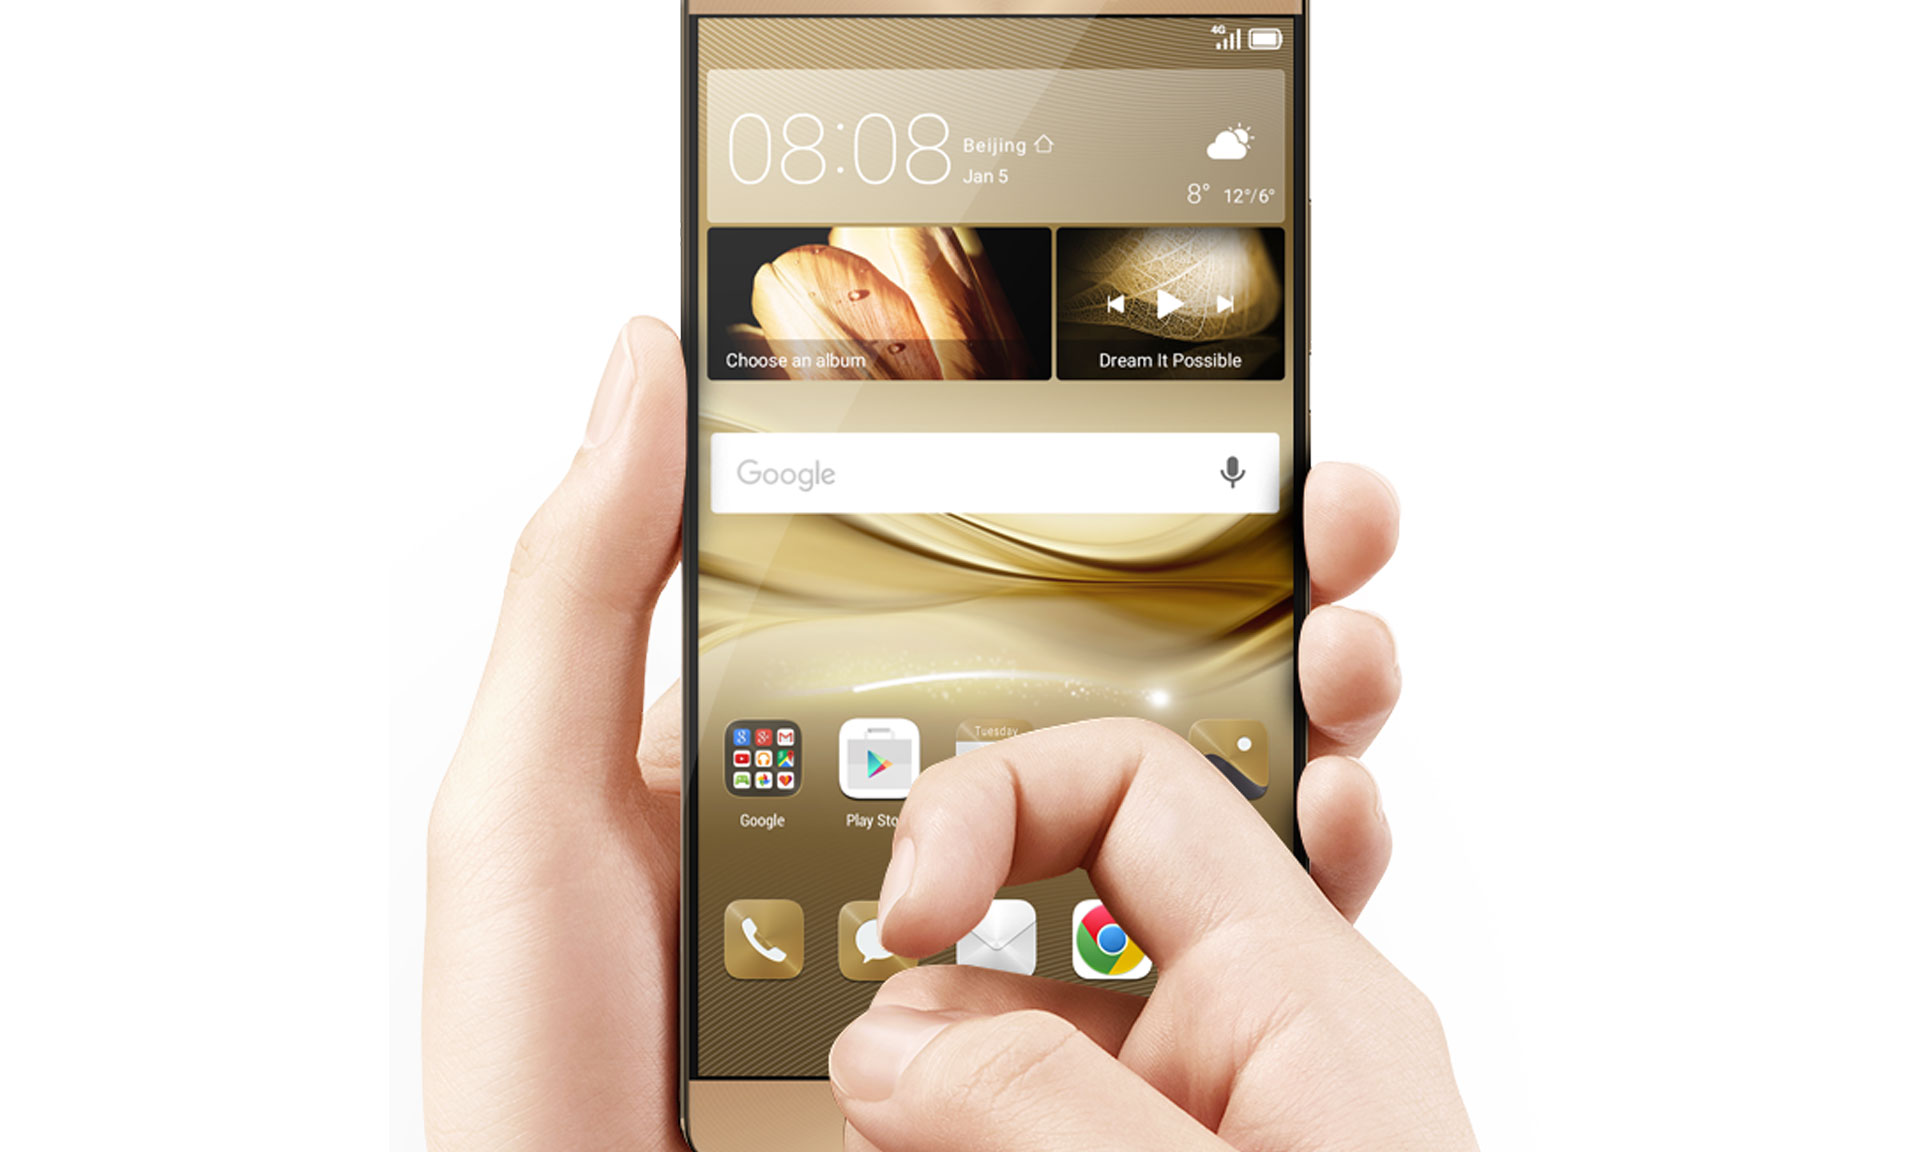 Huawei Mate 8/ Android Nougat